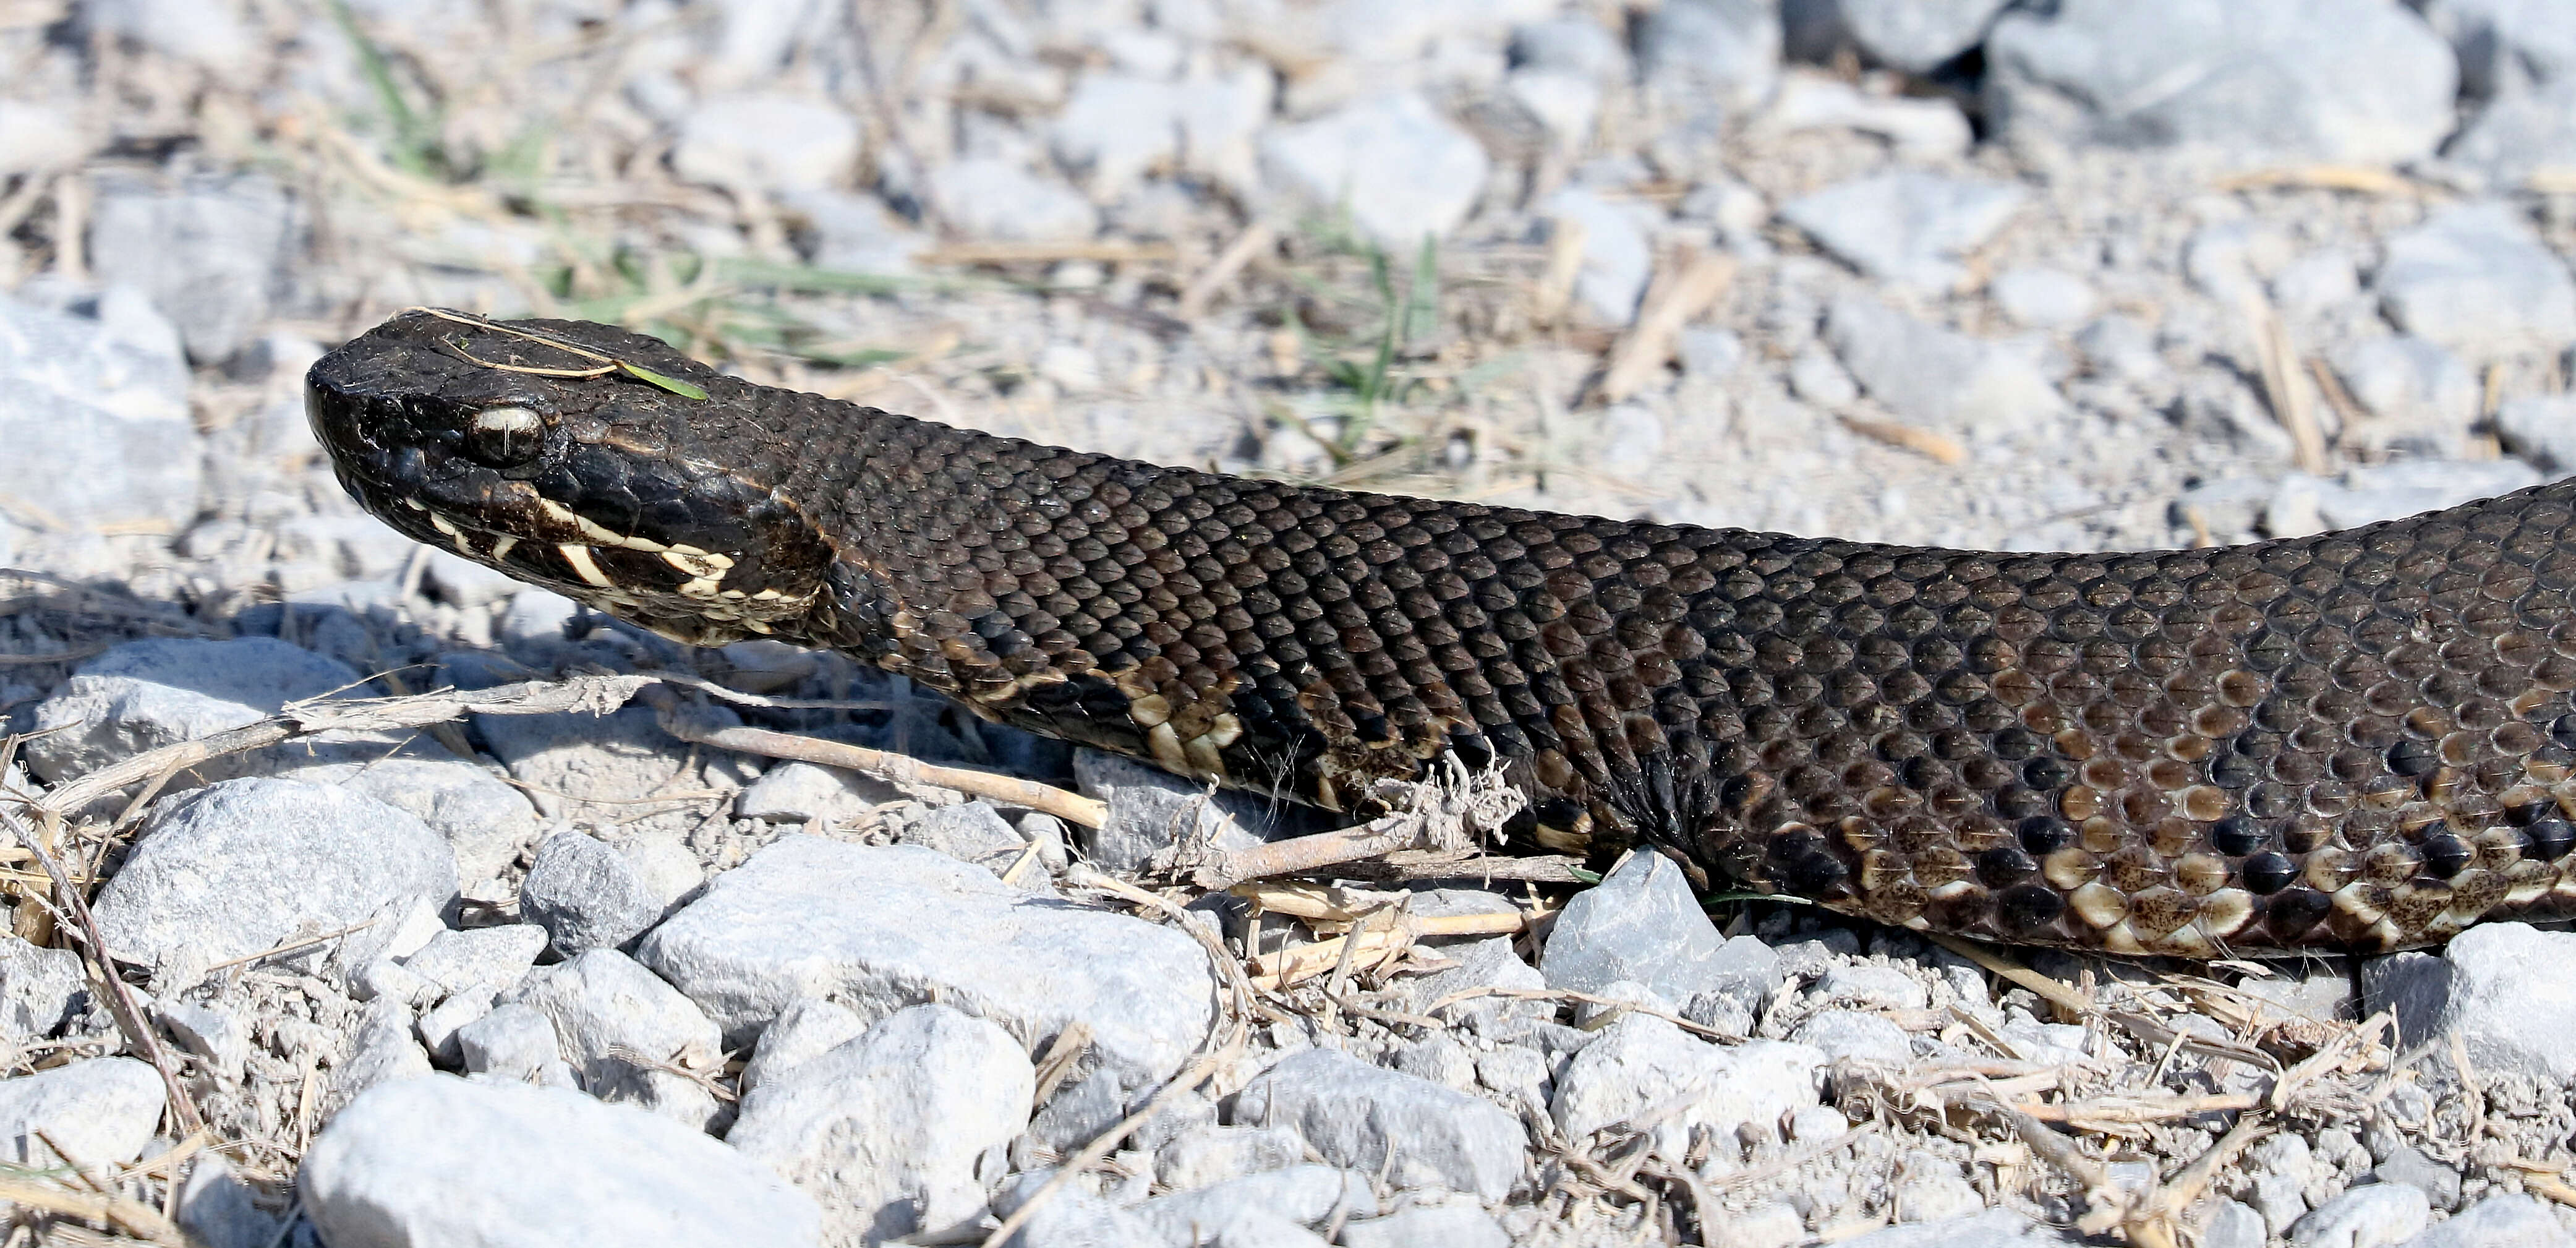 Image of Cottonmouth